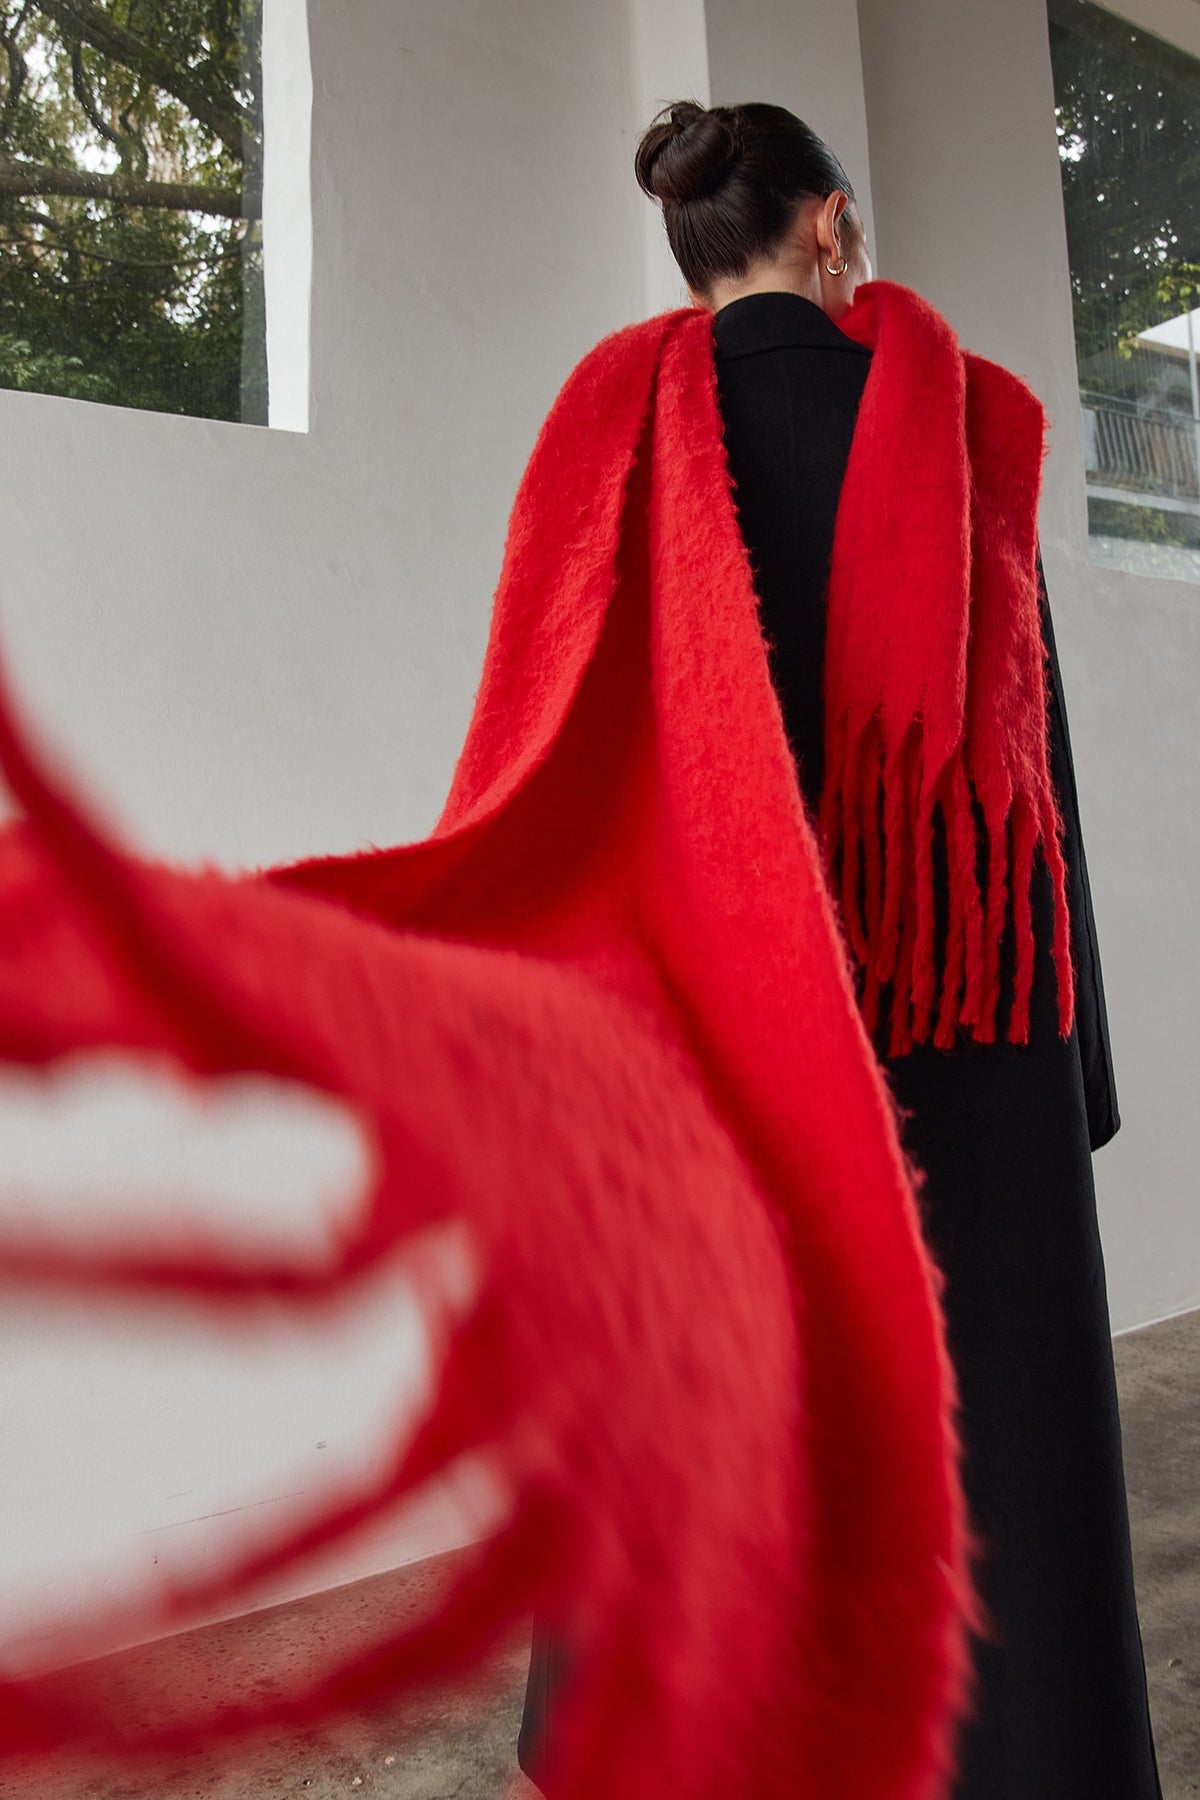 Perfect Stranger Plush Oversized Knit Scarf Red